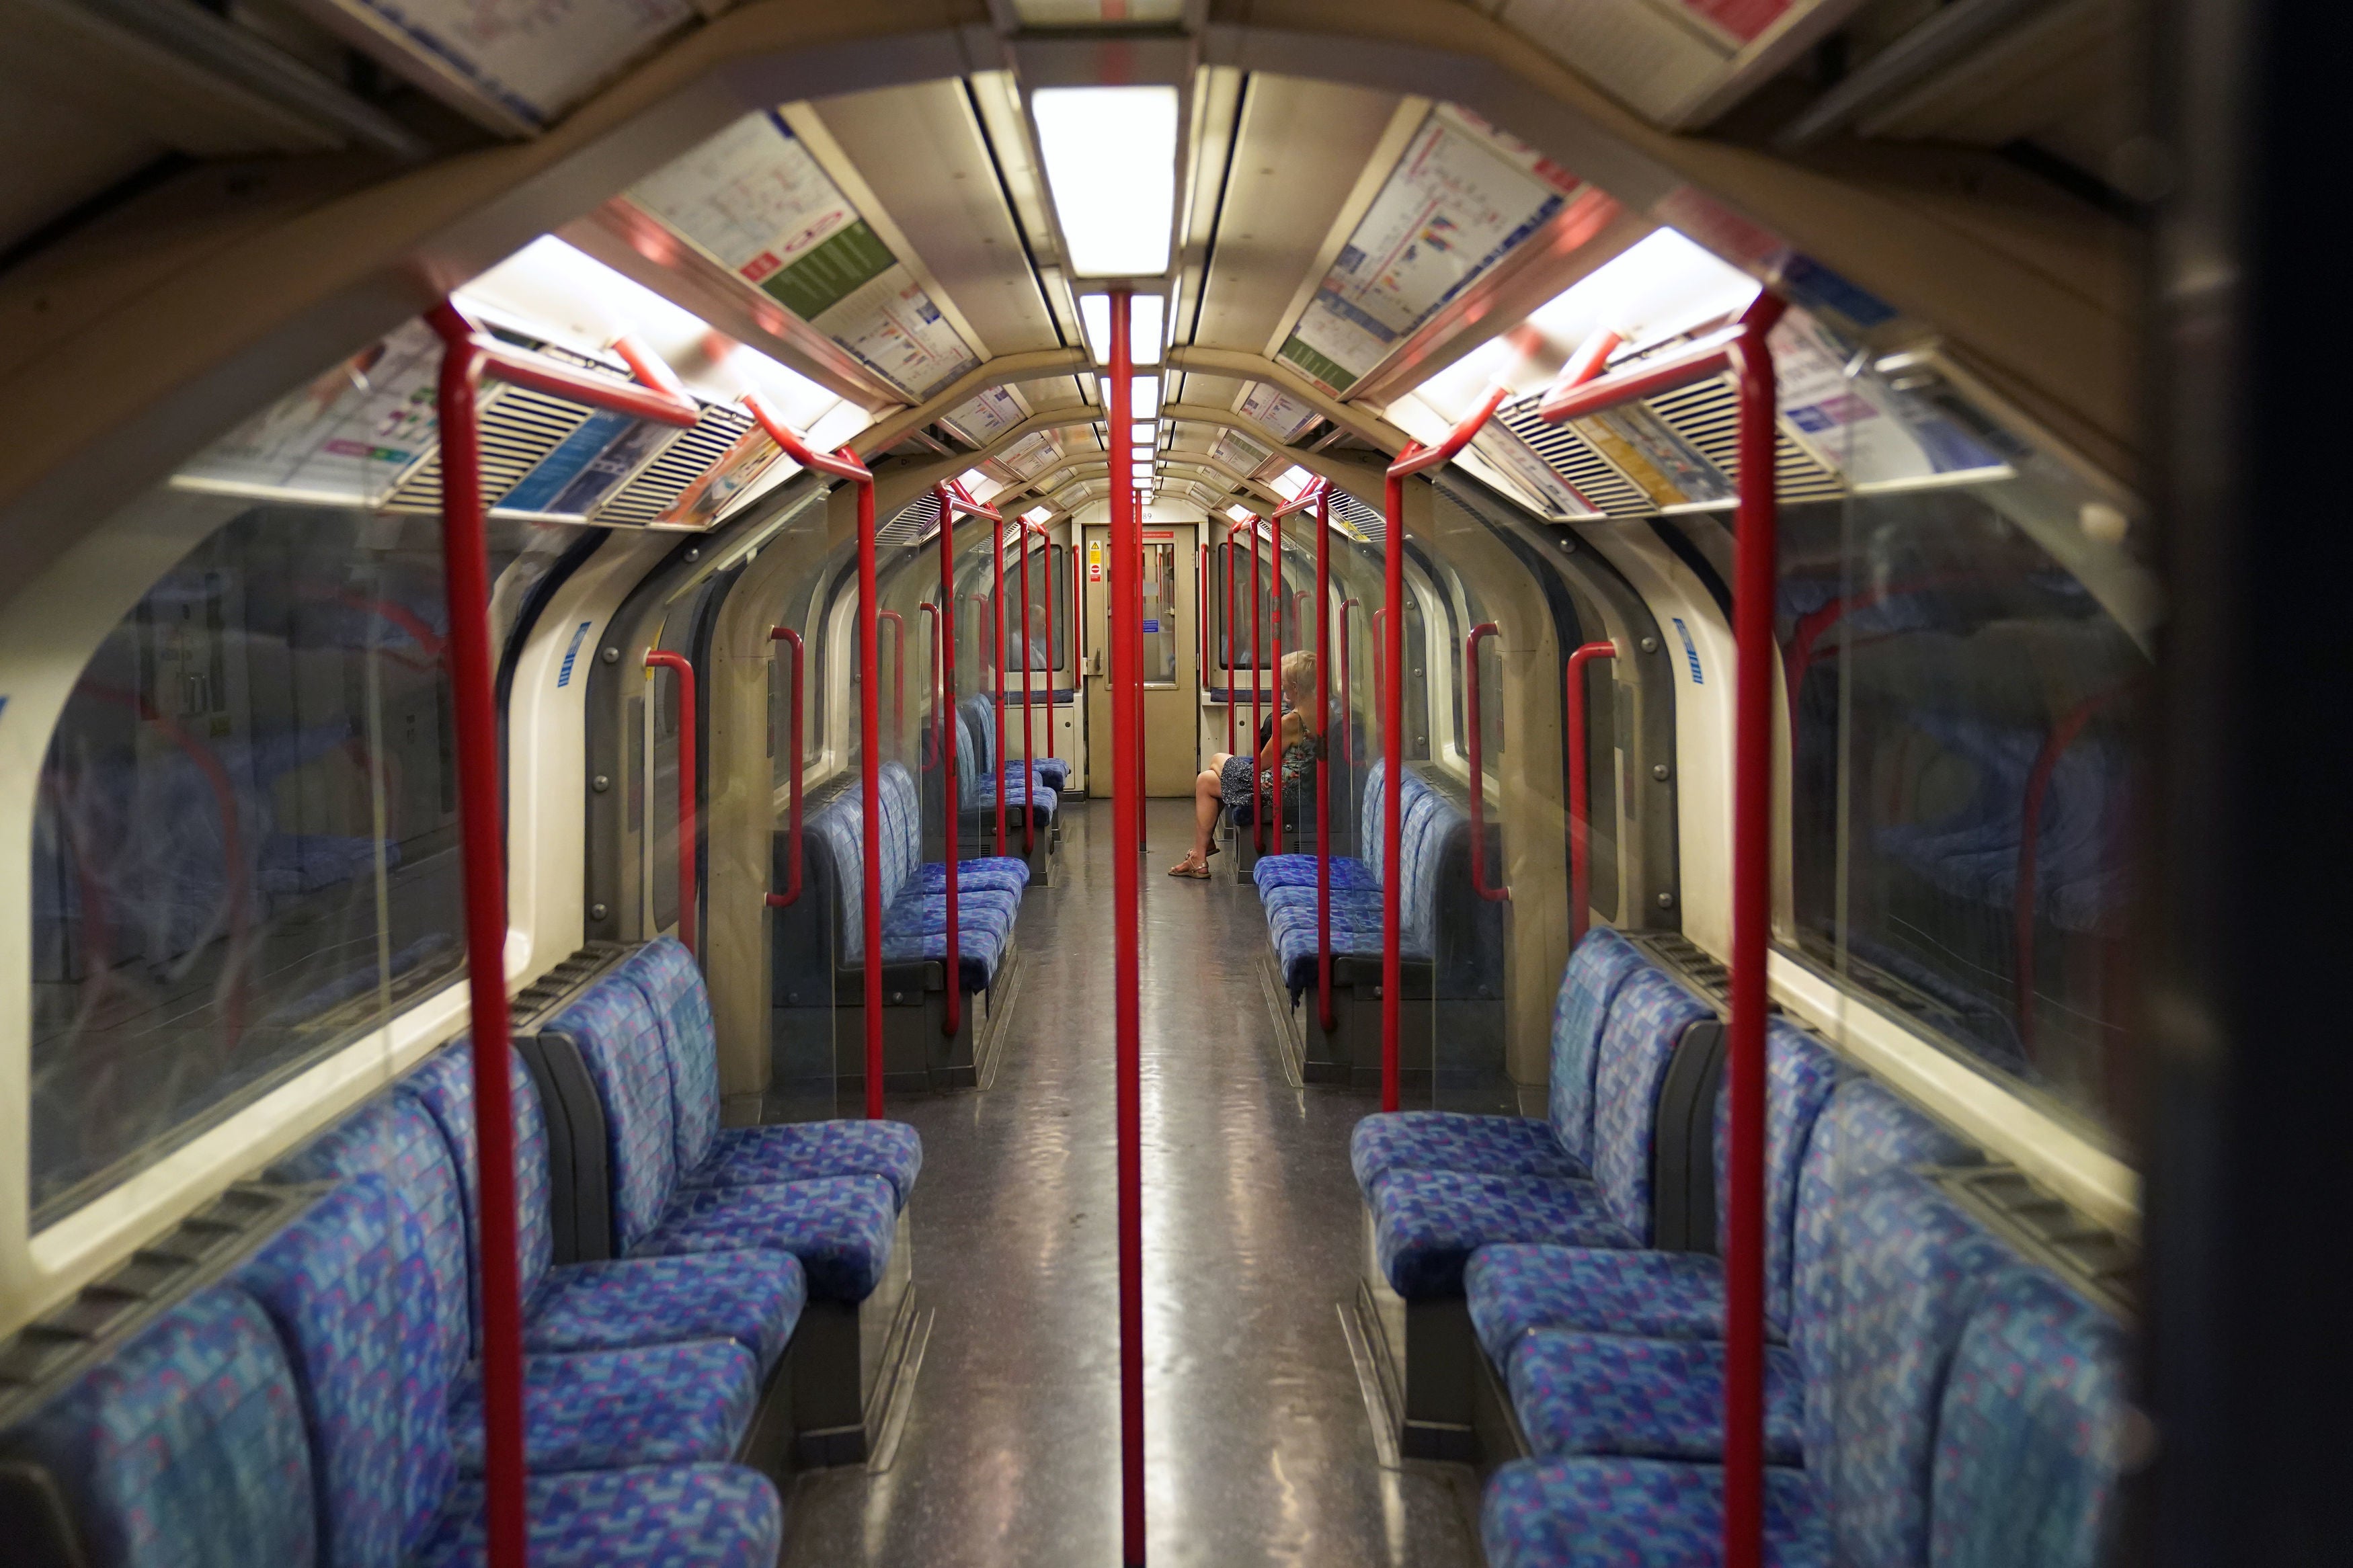 One person on the Central Line this morning